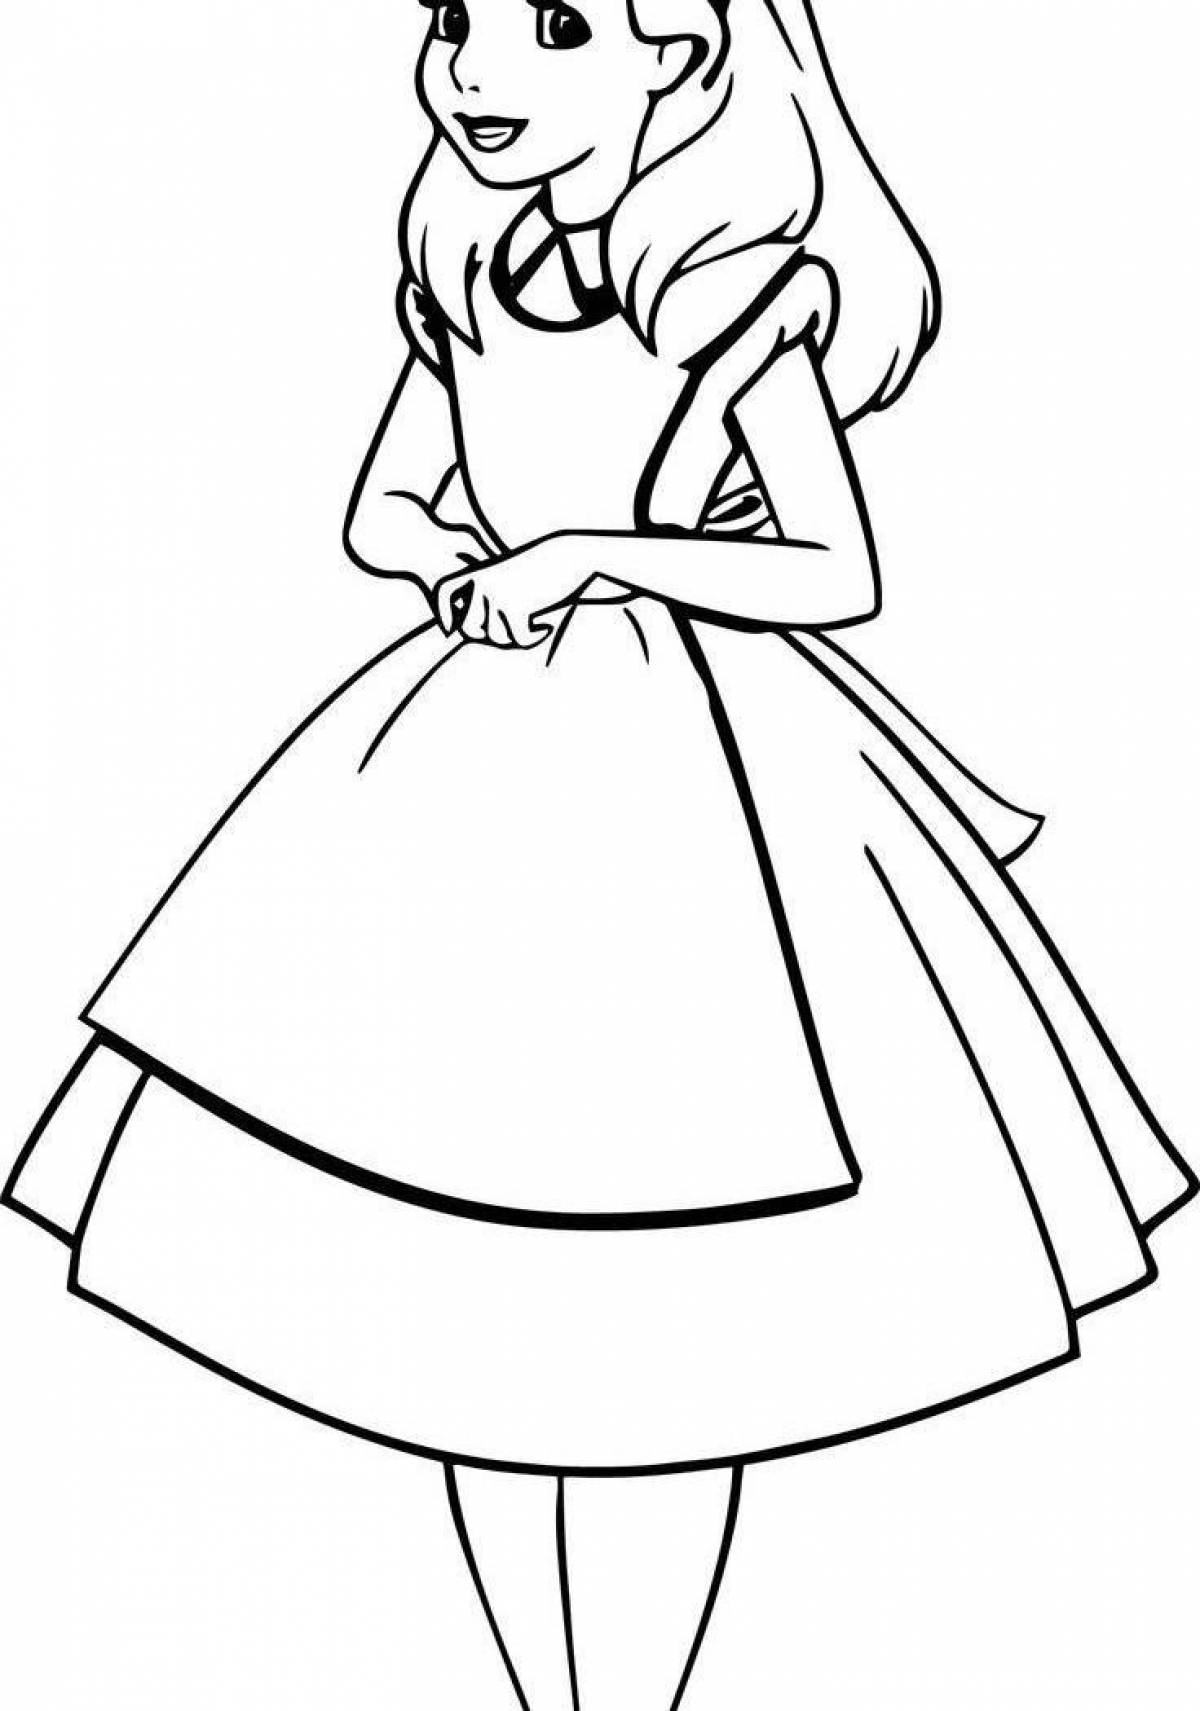 Alice's playful coloring page